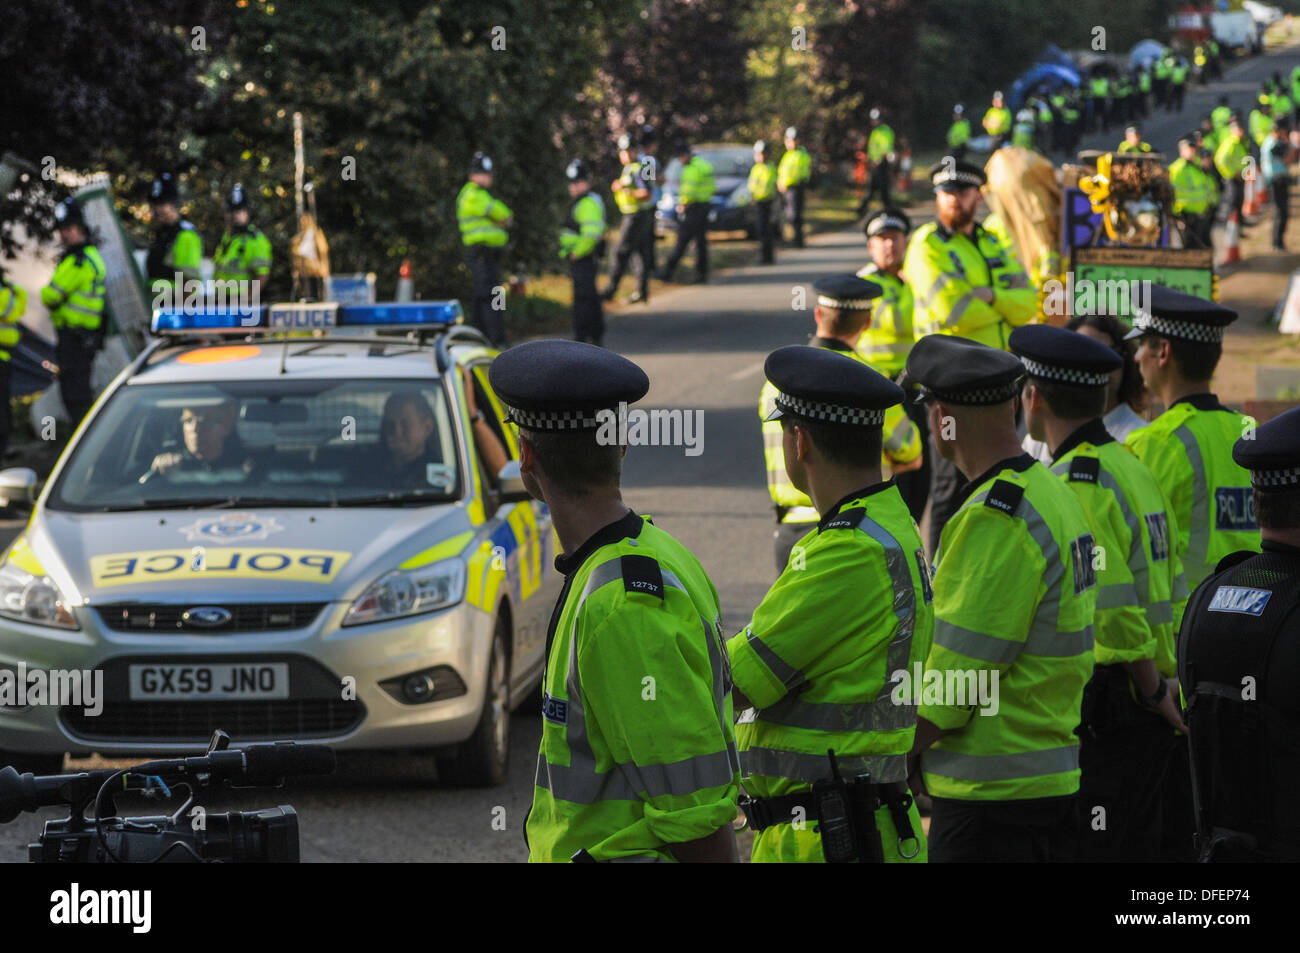 Police Officers line the roadside with Police car on left. Anti fracking protests at Balcombe, West Sussex,UK Stock Photo